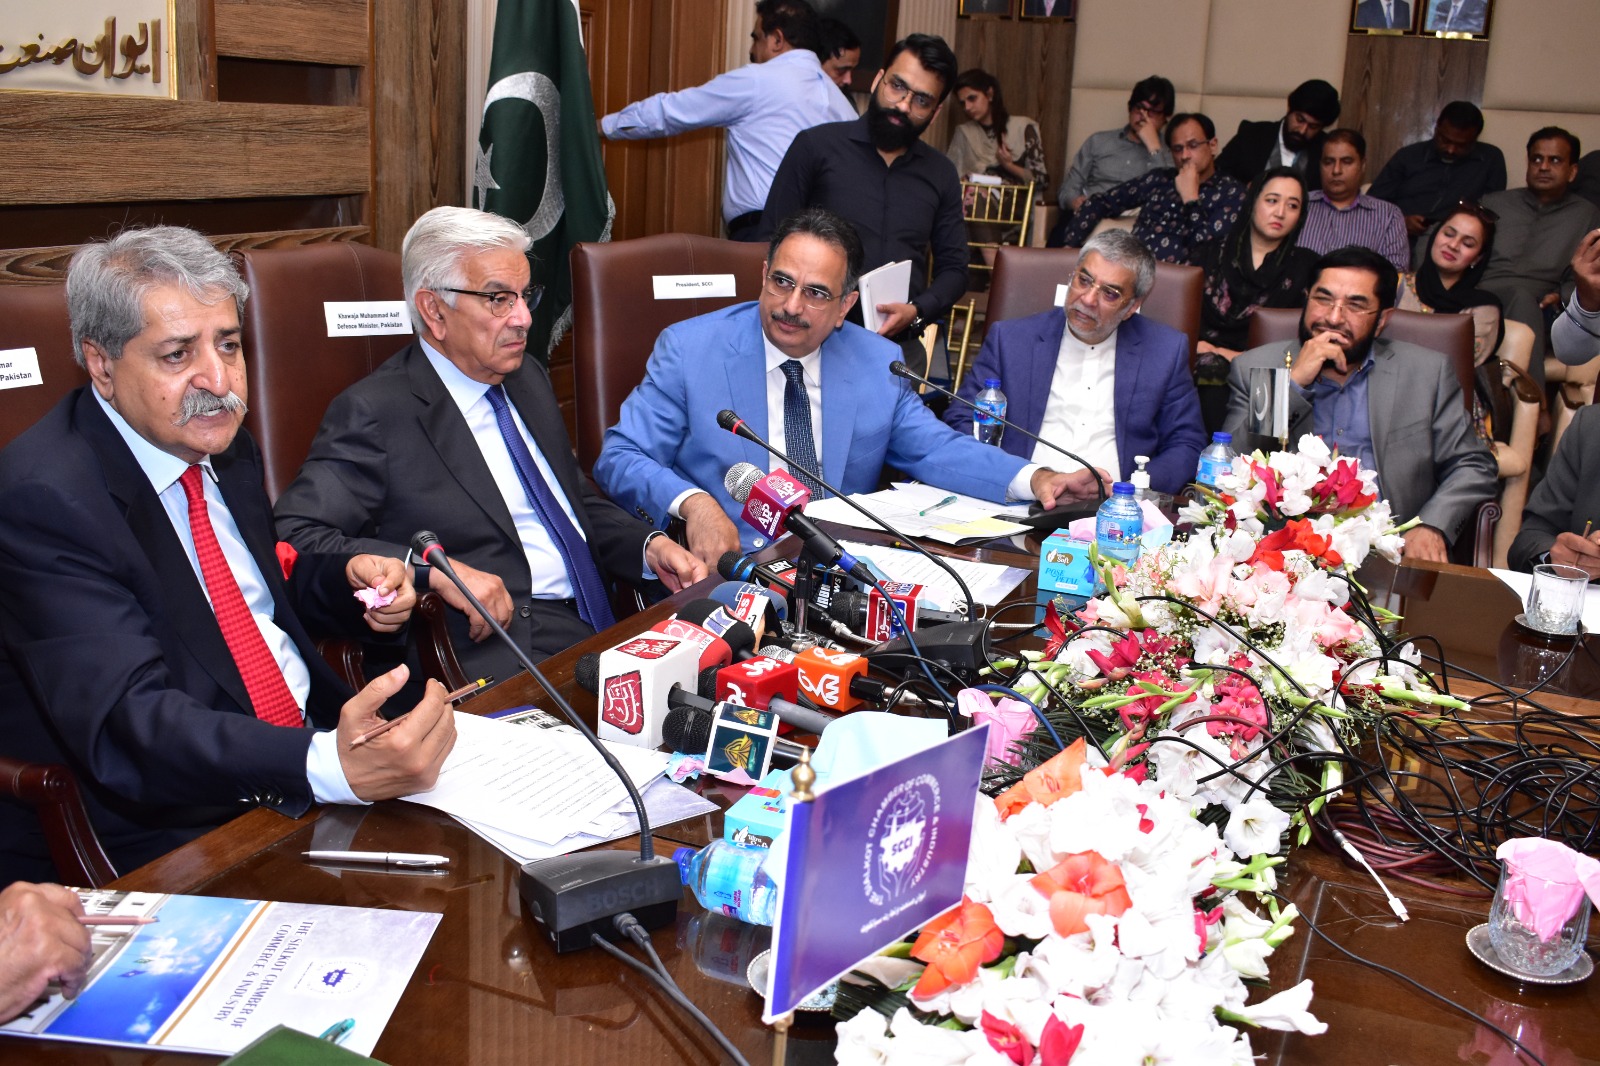 Ministers Naveed Qamar, Kh Asif attend interactive session at SCCI